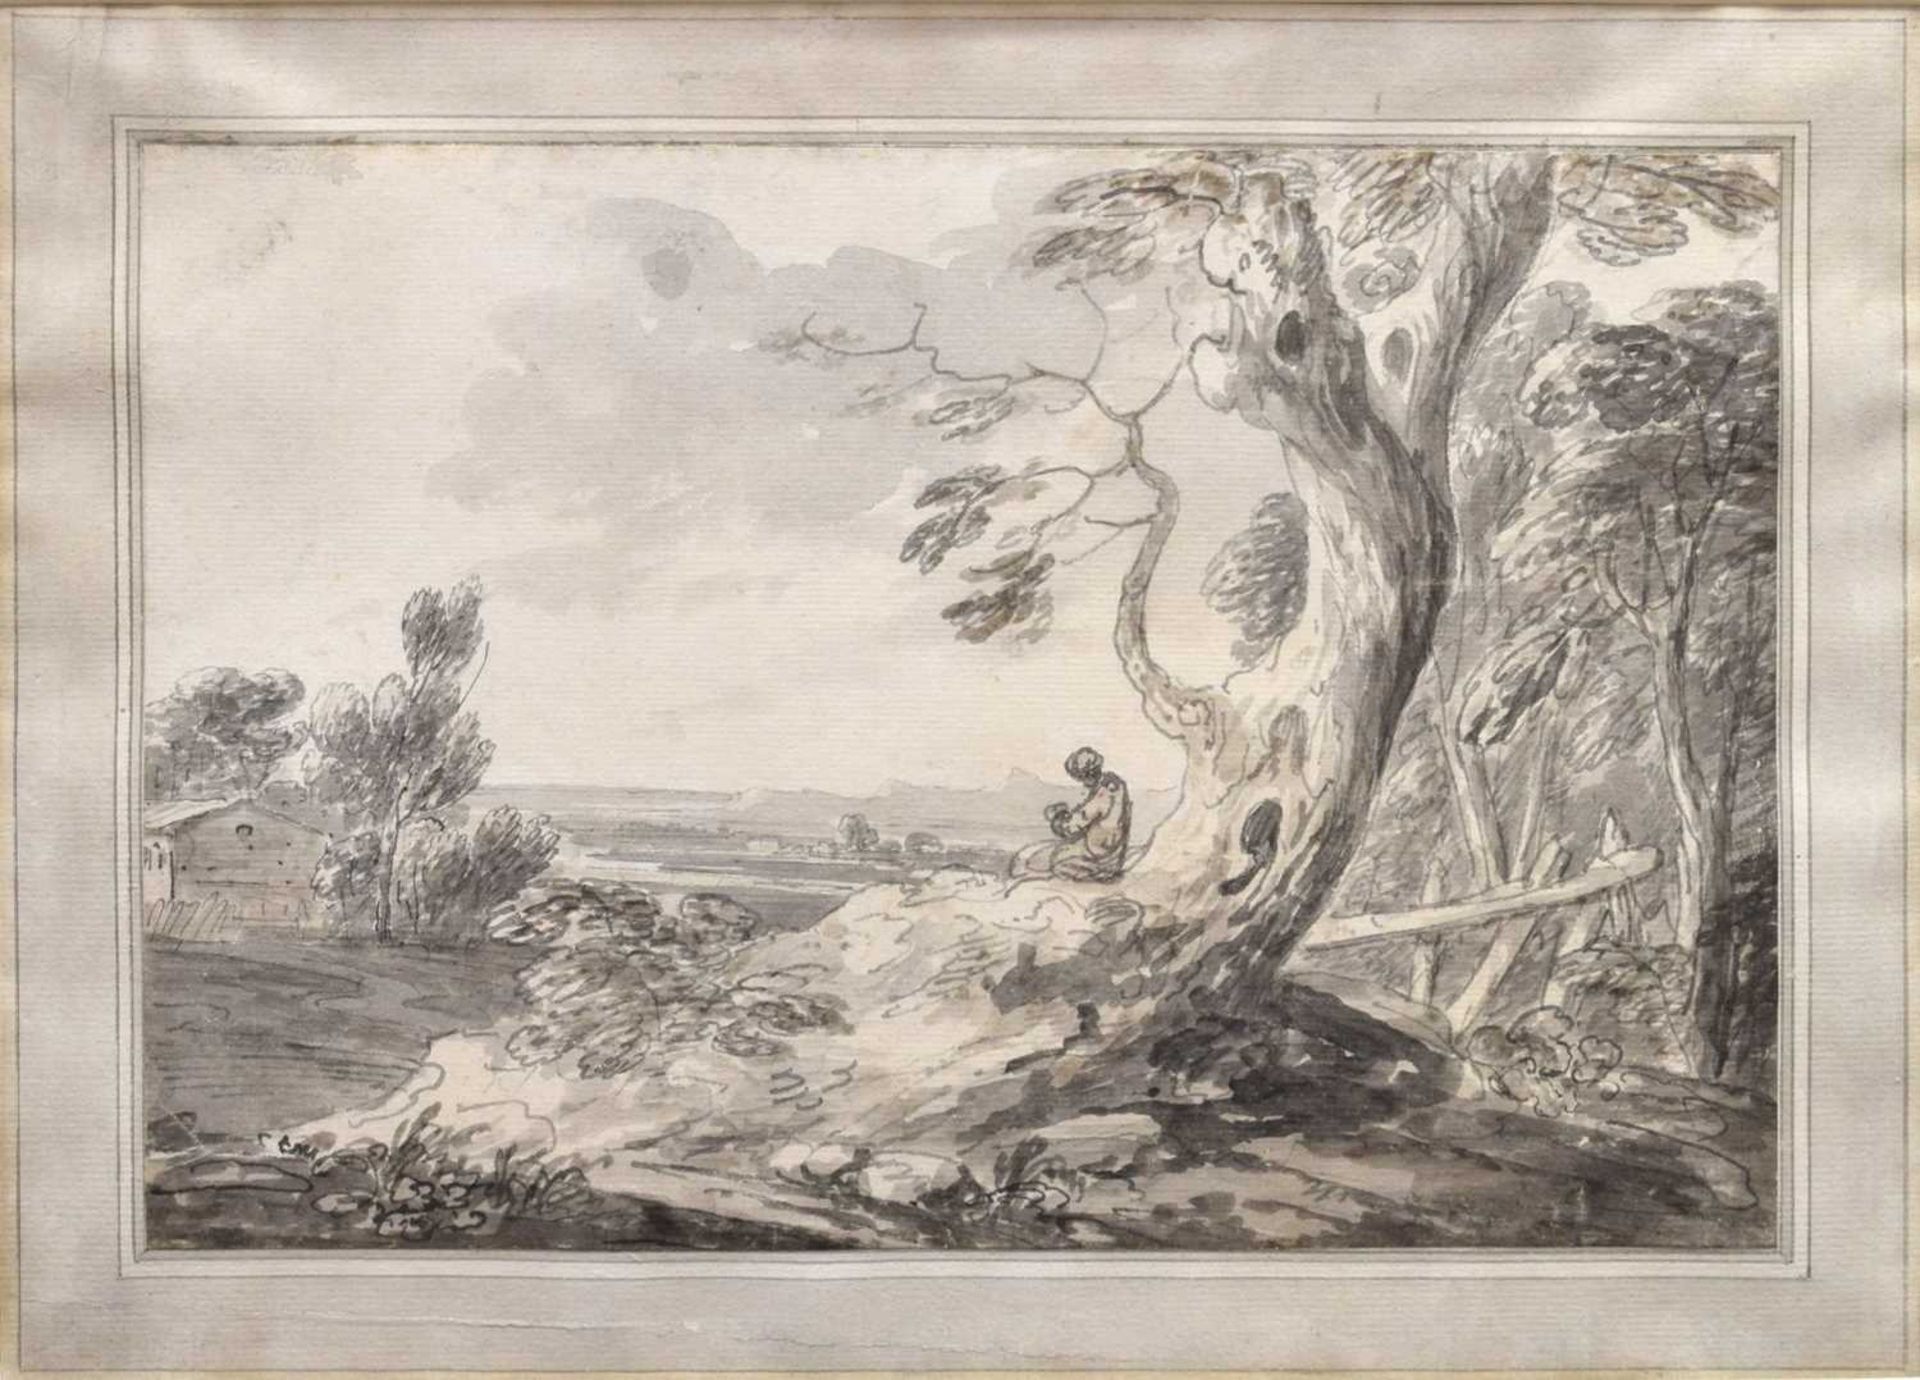 Attributed to Jean-Baptiste-Claude Chatelain (1710-1758)